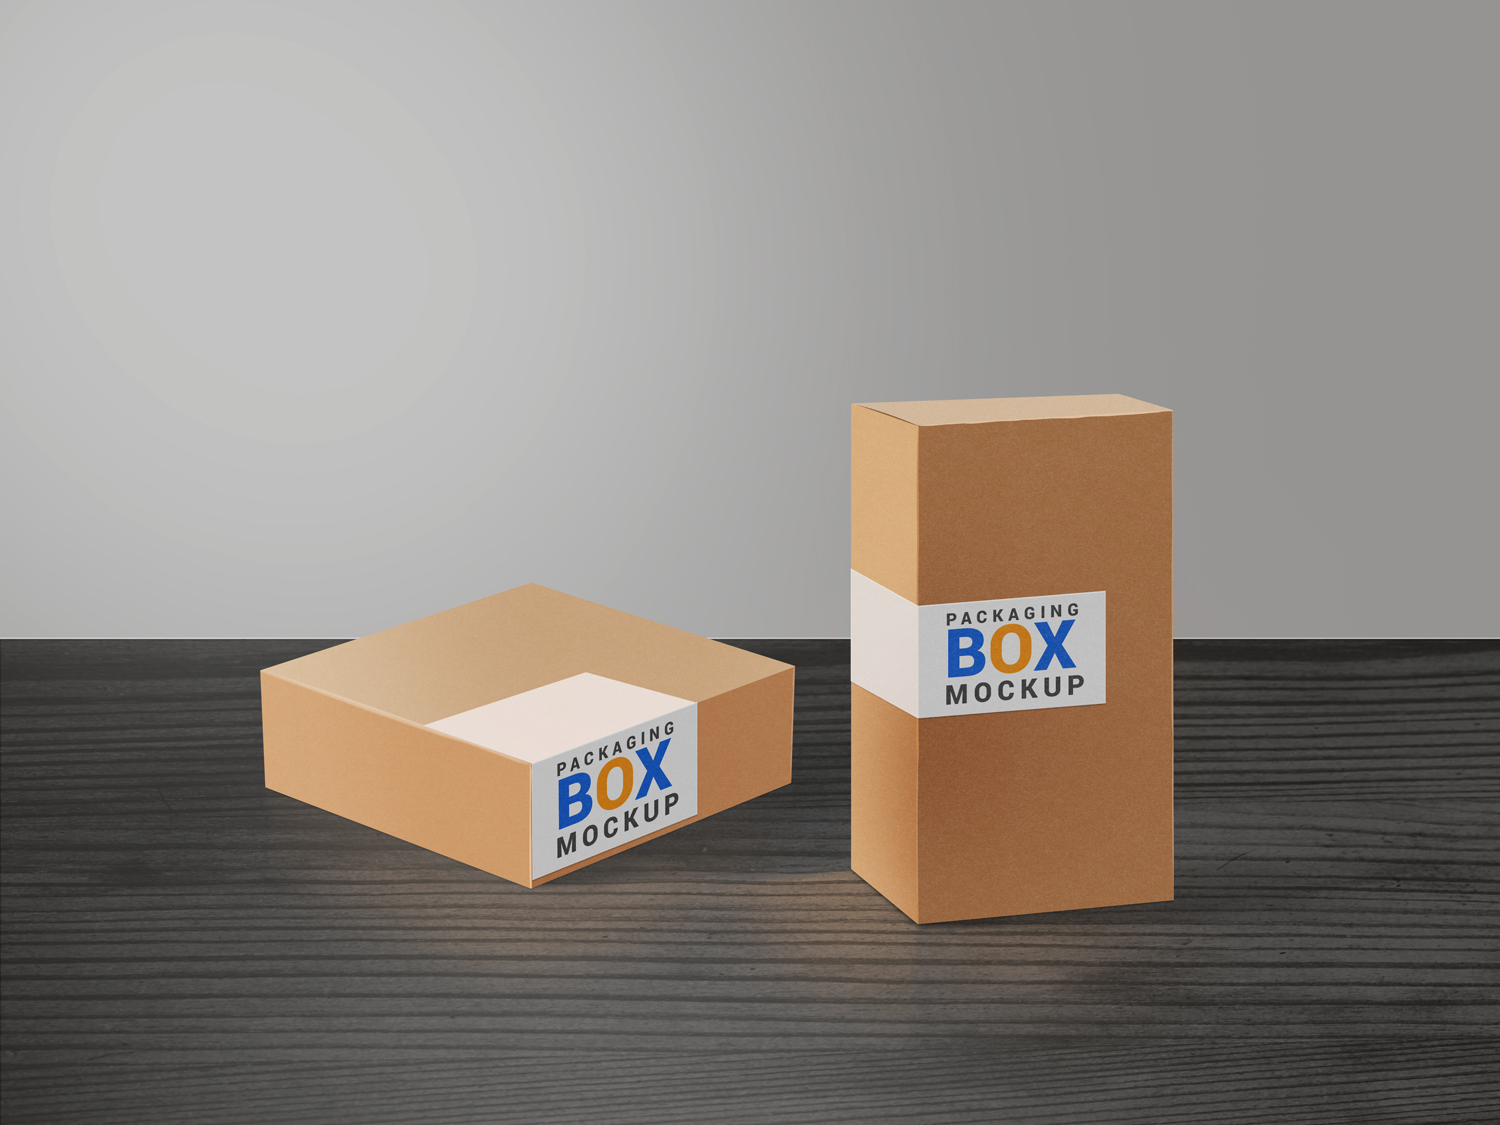 Download Product Packaging Boxes Psd Mockup Best Free Mockups PSD Mockup Templates